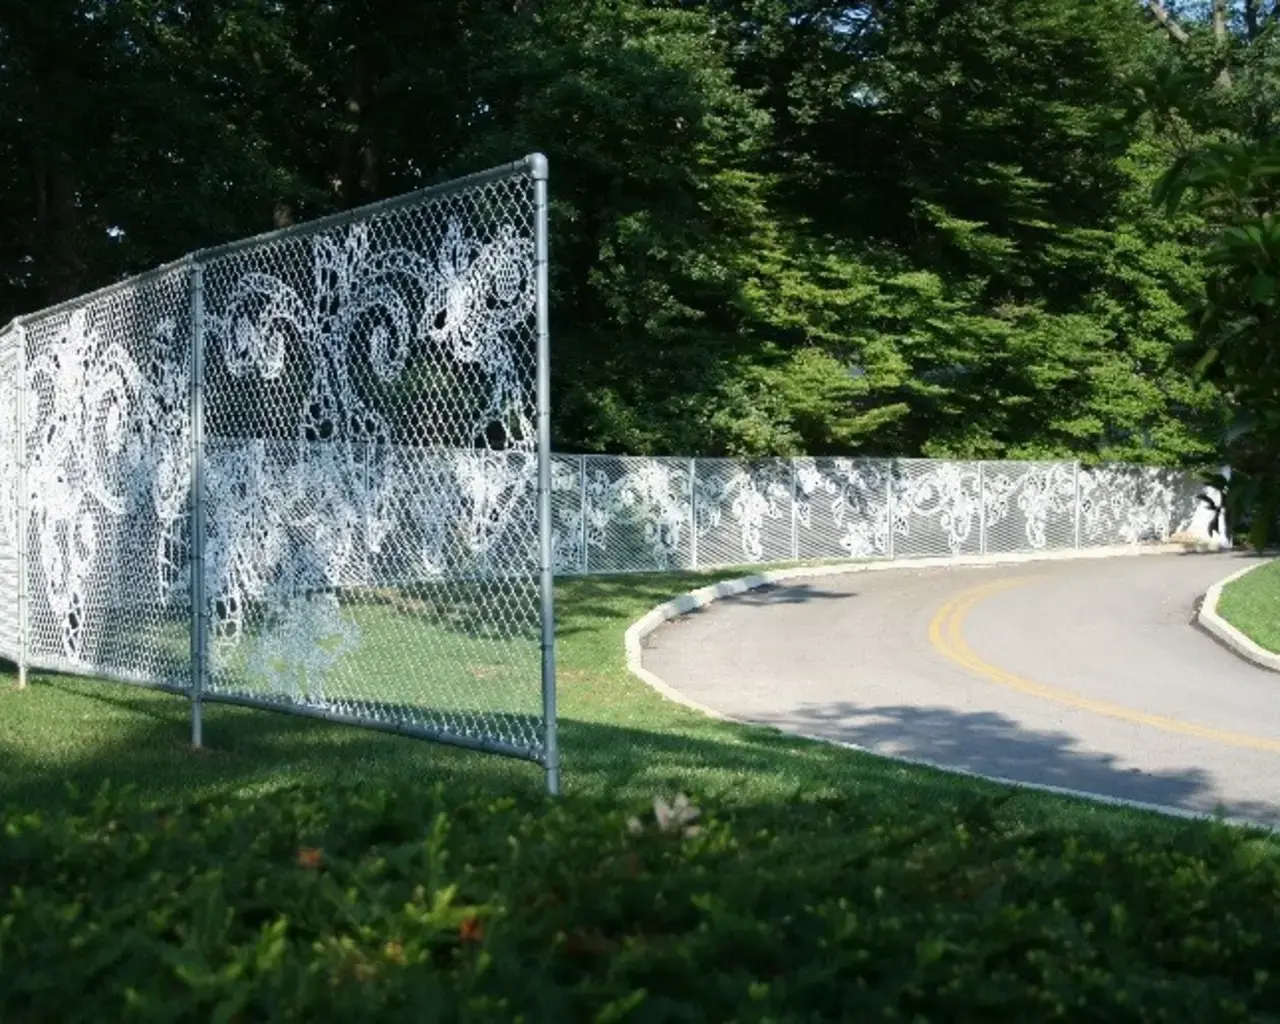 Installation view of Lace Fence&nbsp;by Demakersvan designer Jeroen Verhoeven, 2009. Photo by Kerry Polite, Courtesy of The Design Center.